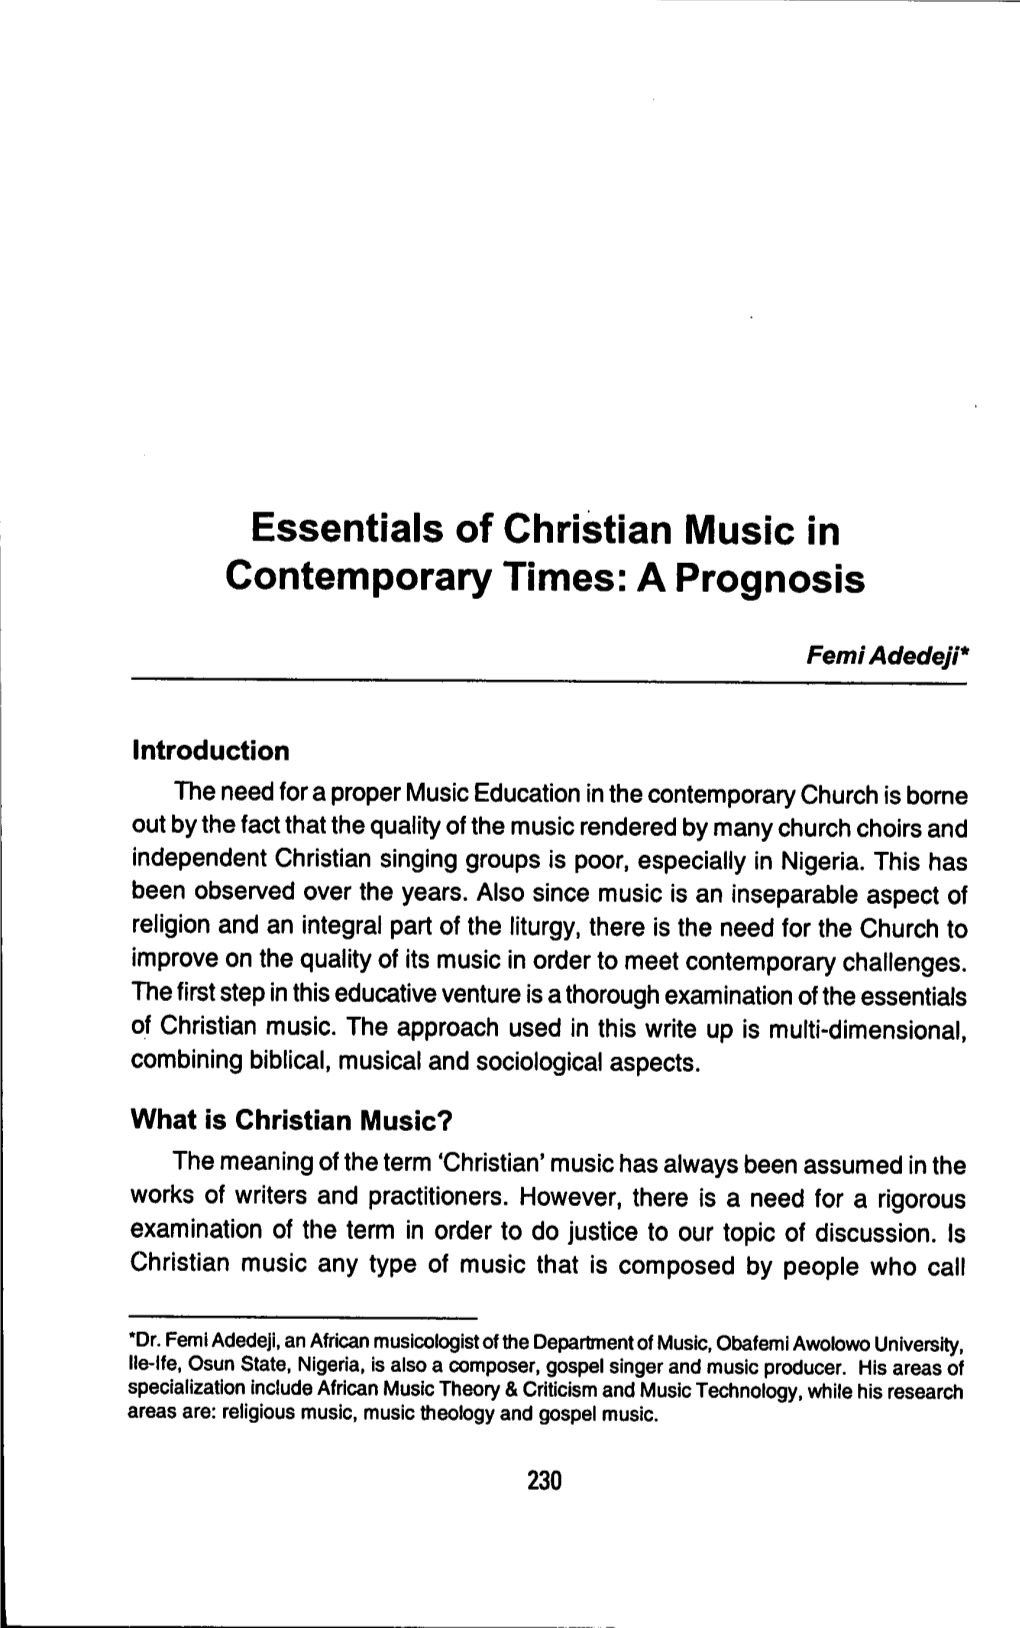 Essentials of Christian Music in Contemporary Times